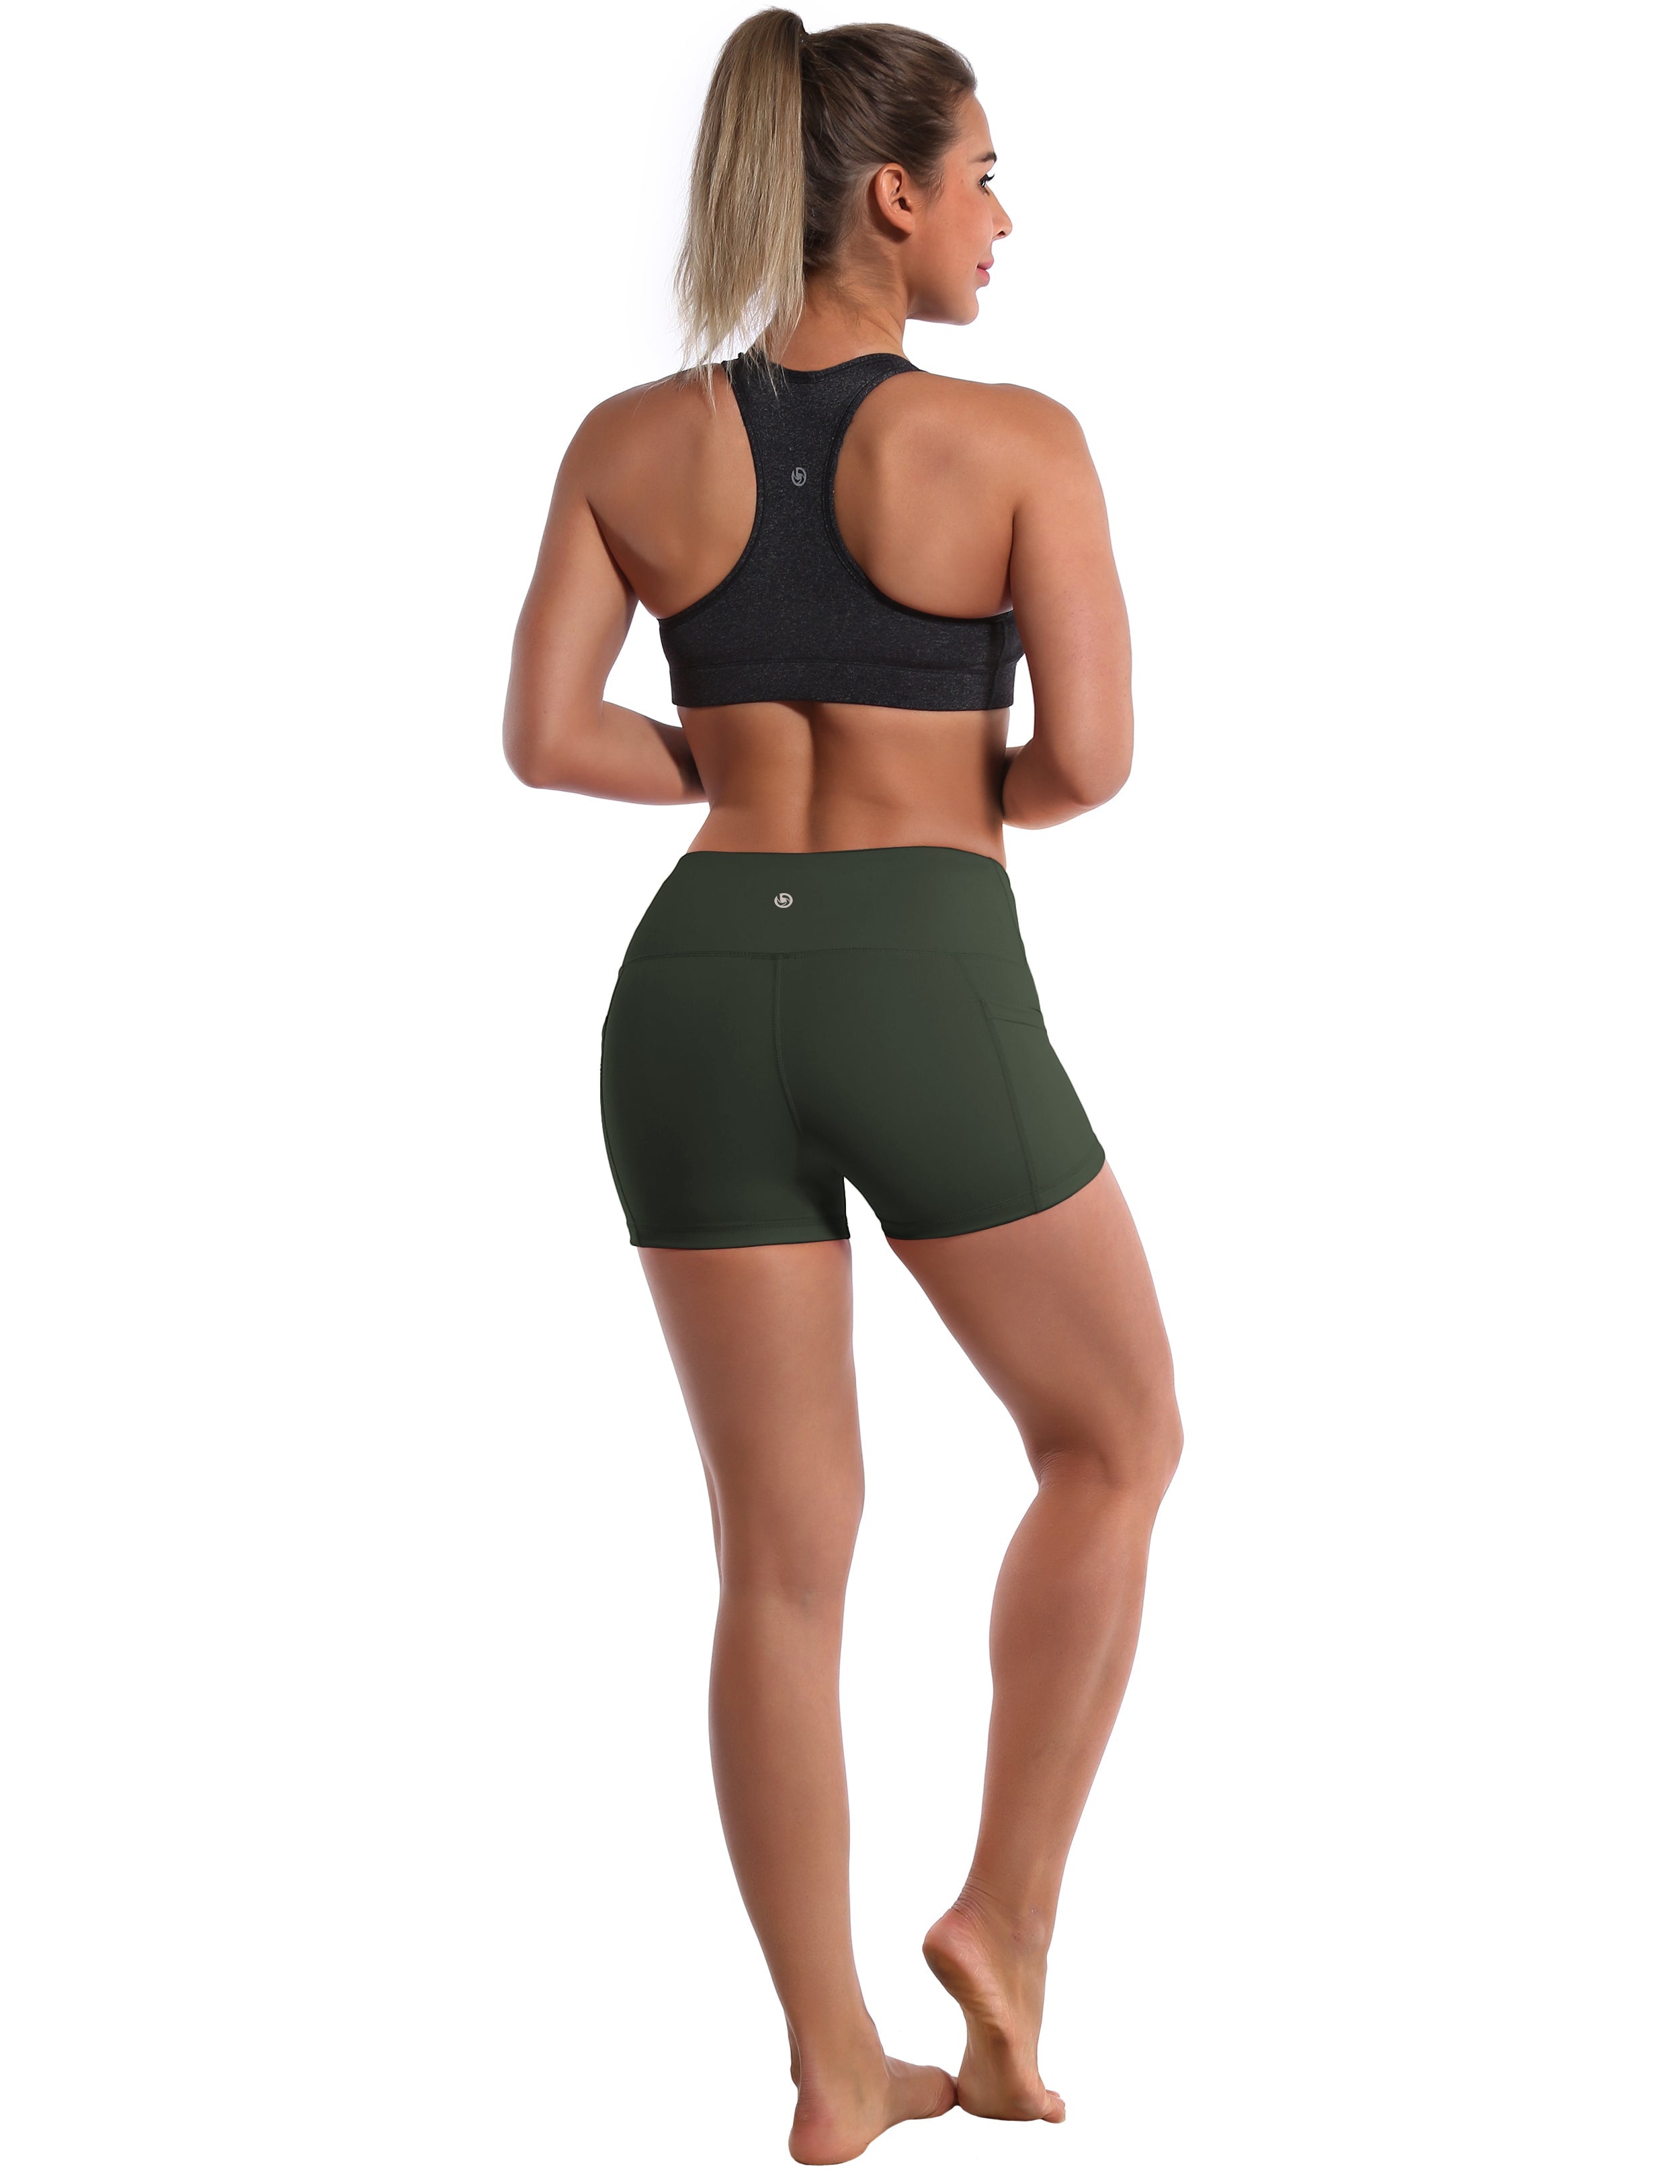 2.5" Side Pockets Yoga Shorts olivegray Sleek, soft, smooth and totally comfortable: our newest sexy style is here. Softest-ever fabric High elasticity High density 4-way stretch Fabric doesn't attract lint easily No see-through Moisture-wicking Machine wash 78% Polyester, 22% Spandex